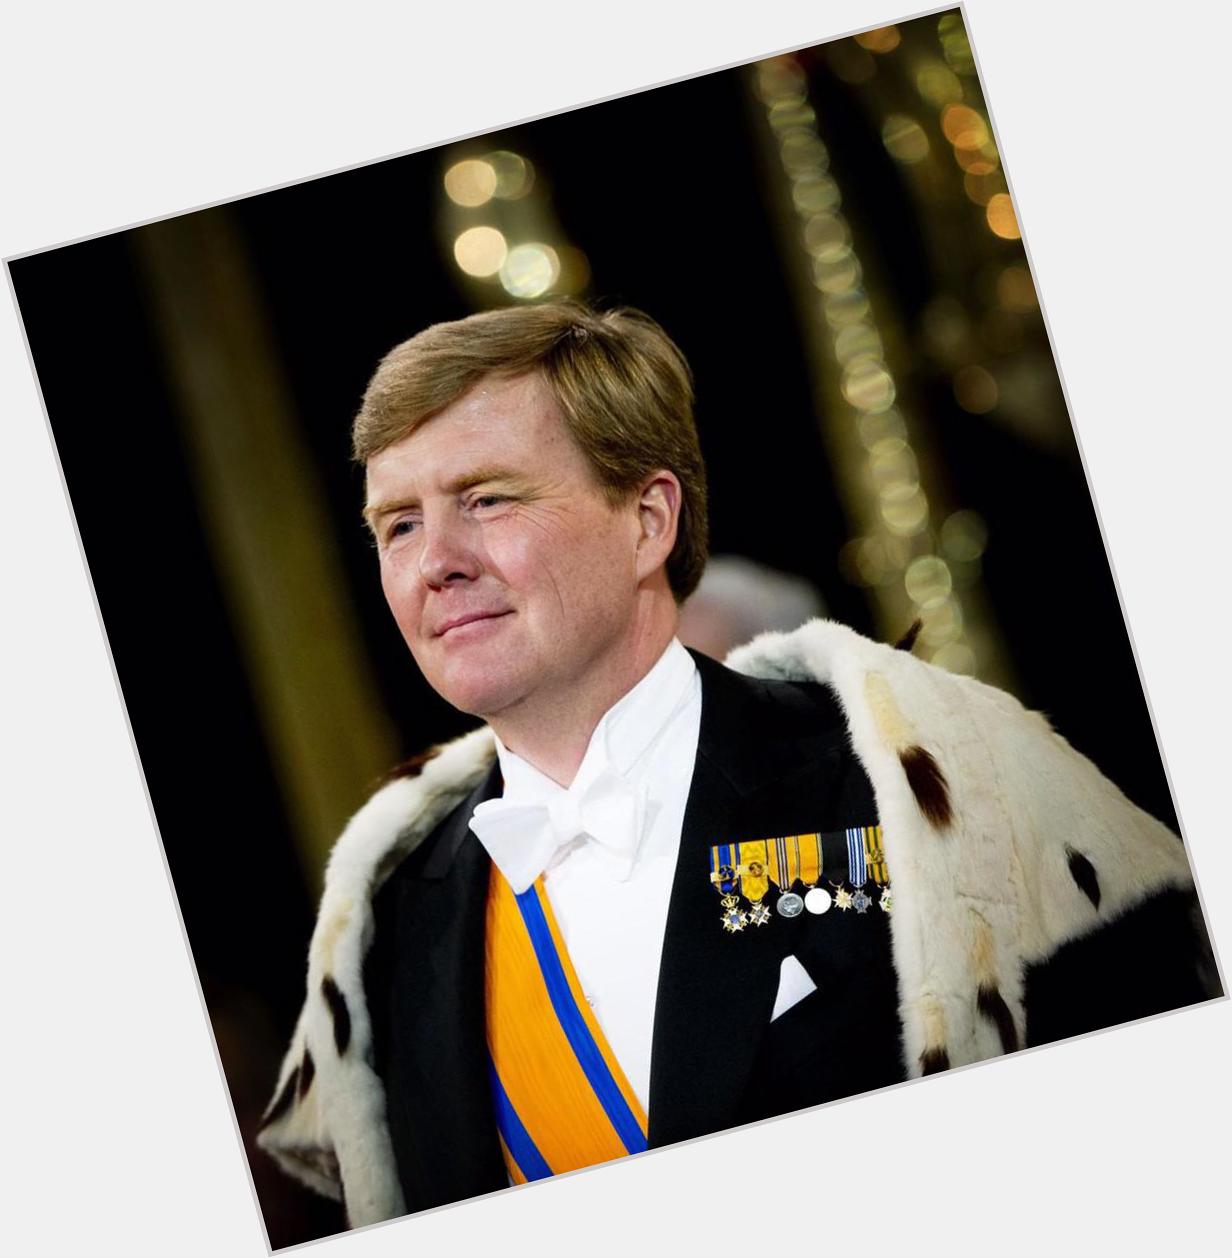 Wishing His Majesty King Willem-Alexander of the Netherlands a happy 48th birthday! 